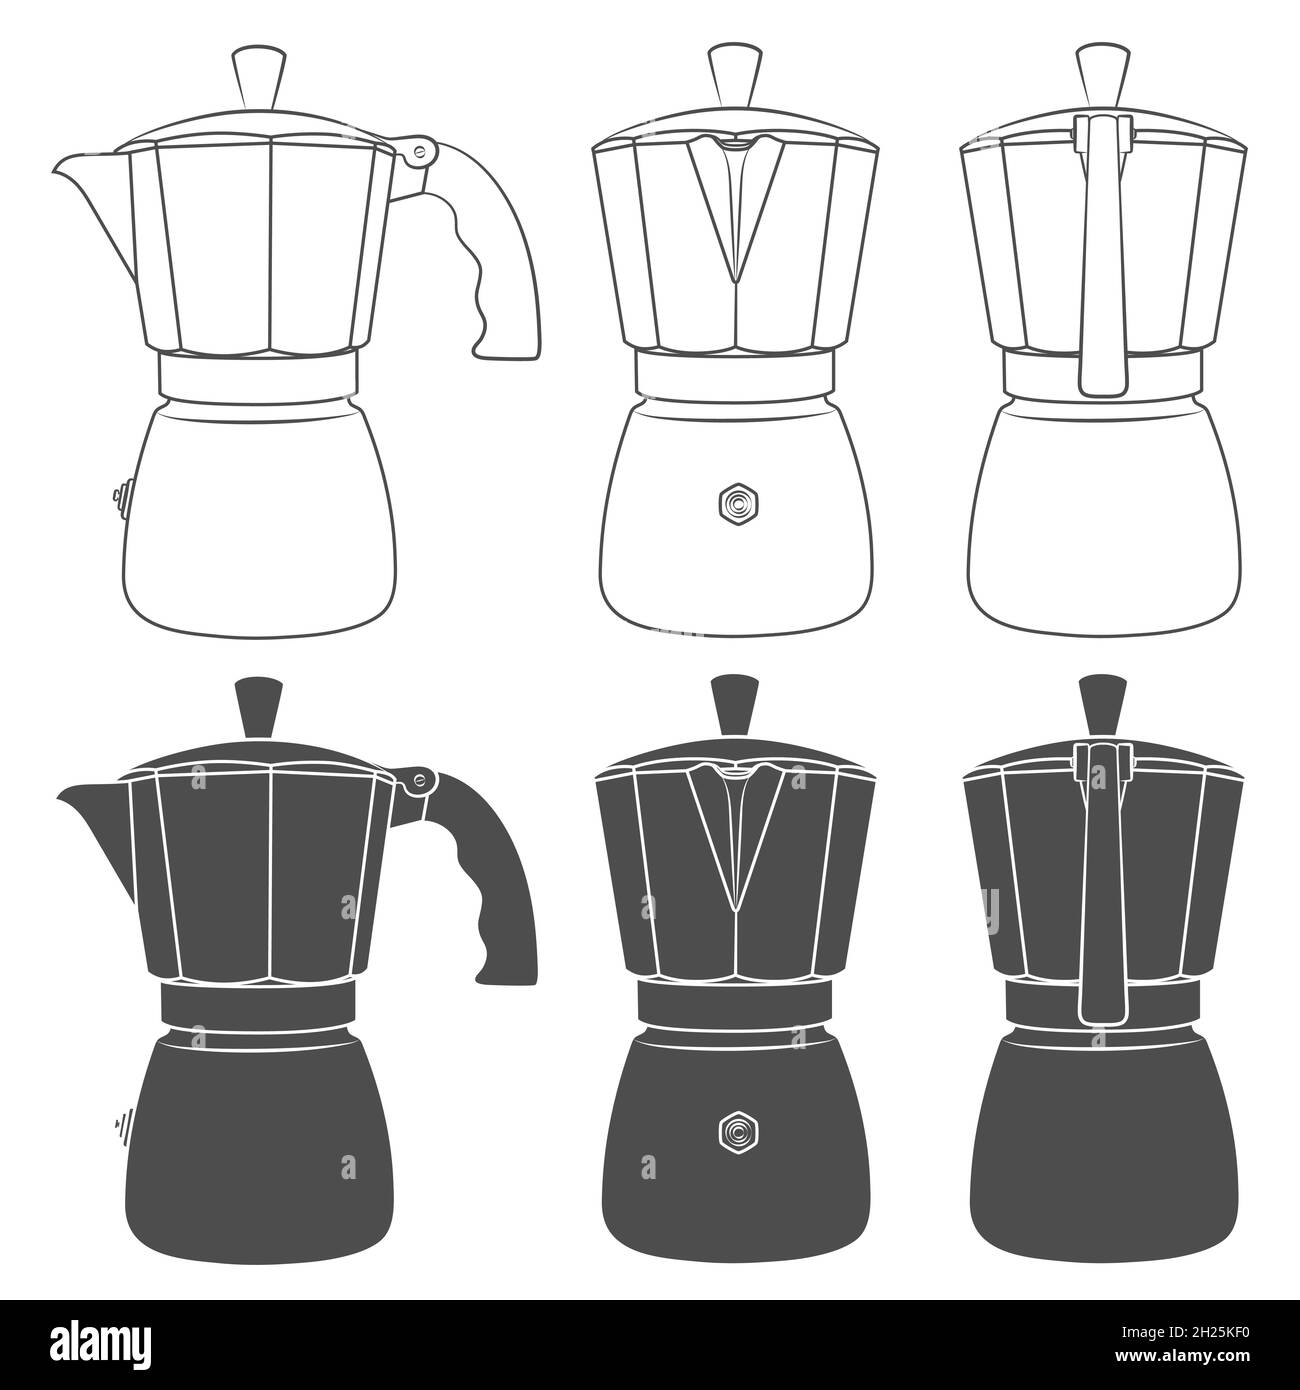 Set of black and white illustrations of geyser coffee makers. Isolated vector objects on white background. Stock Vector